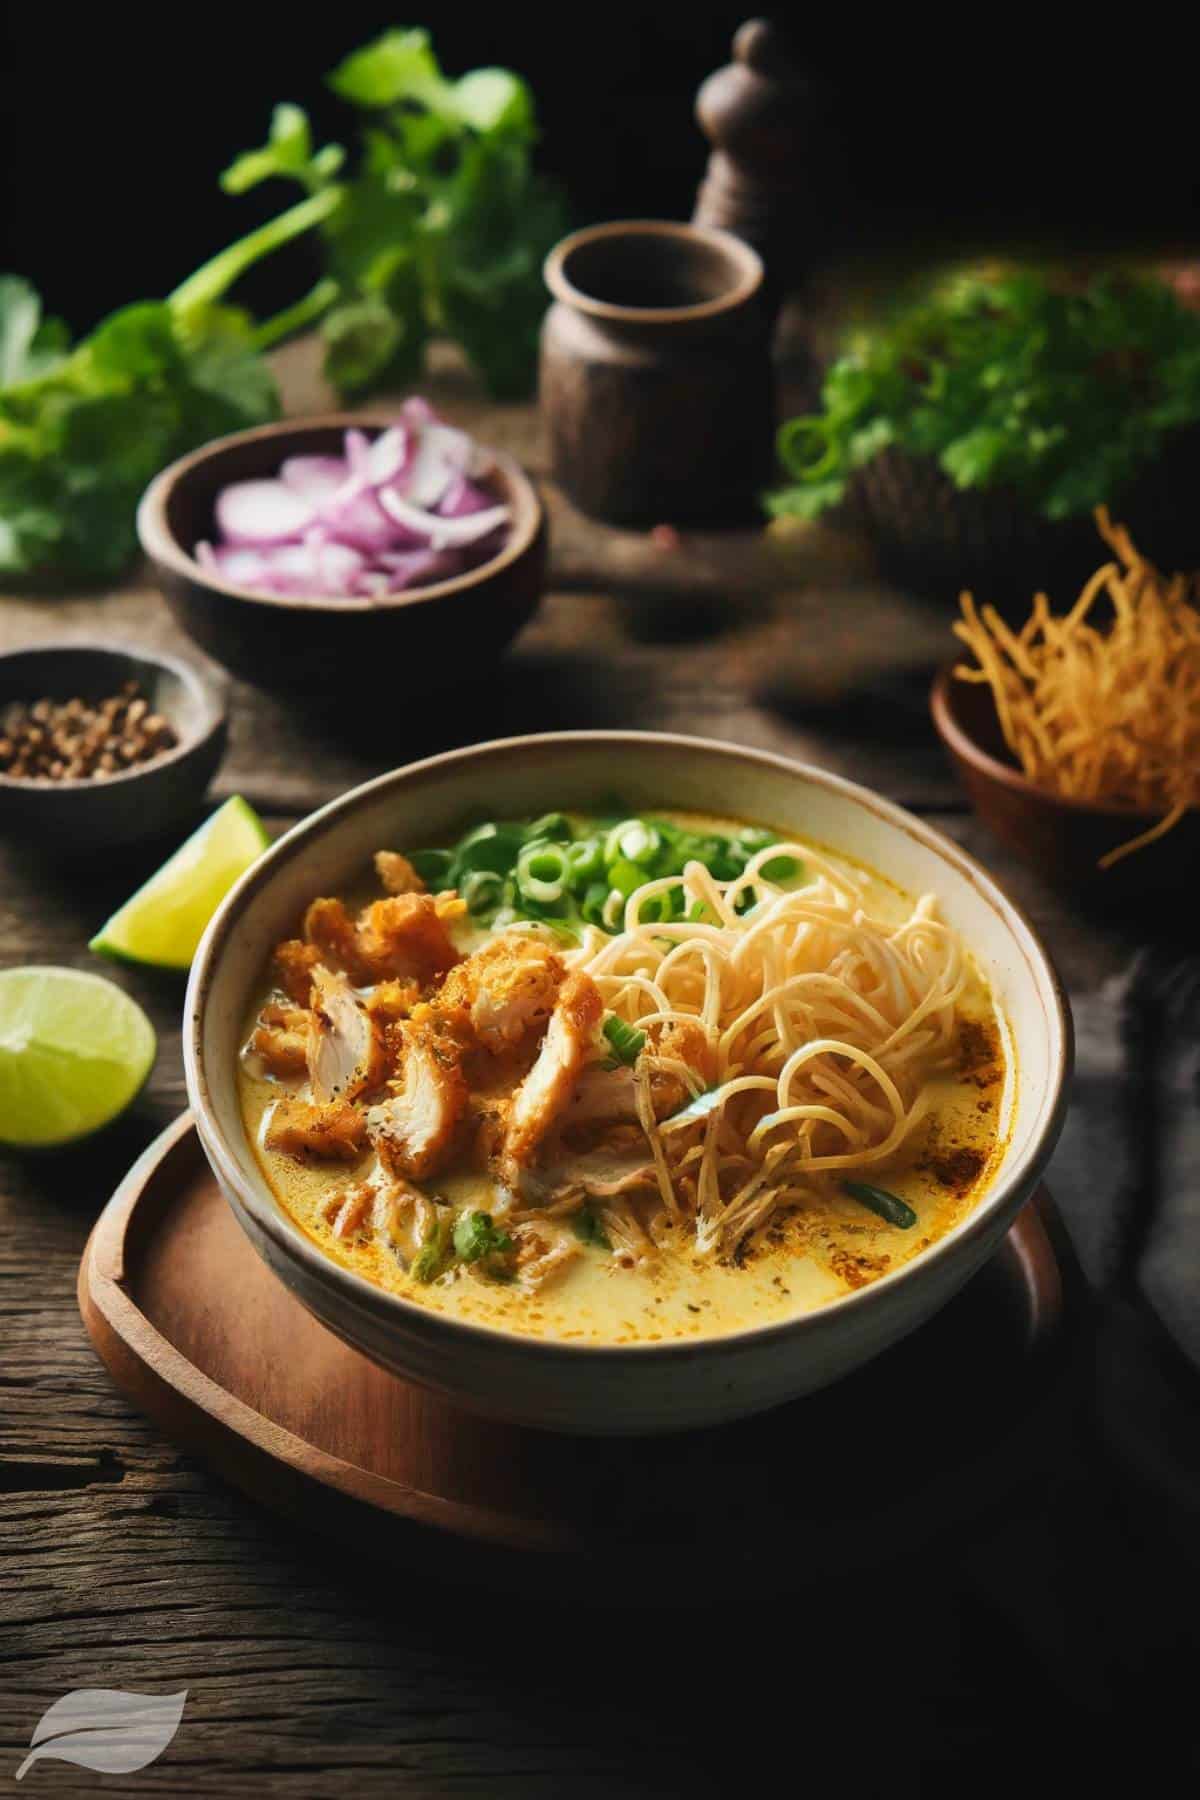 Kho Soi Gai, with creamy coconut curry broth with bite-size chicken pieces